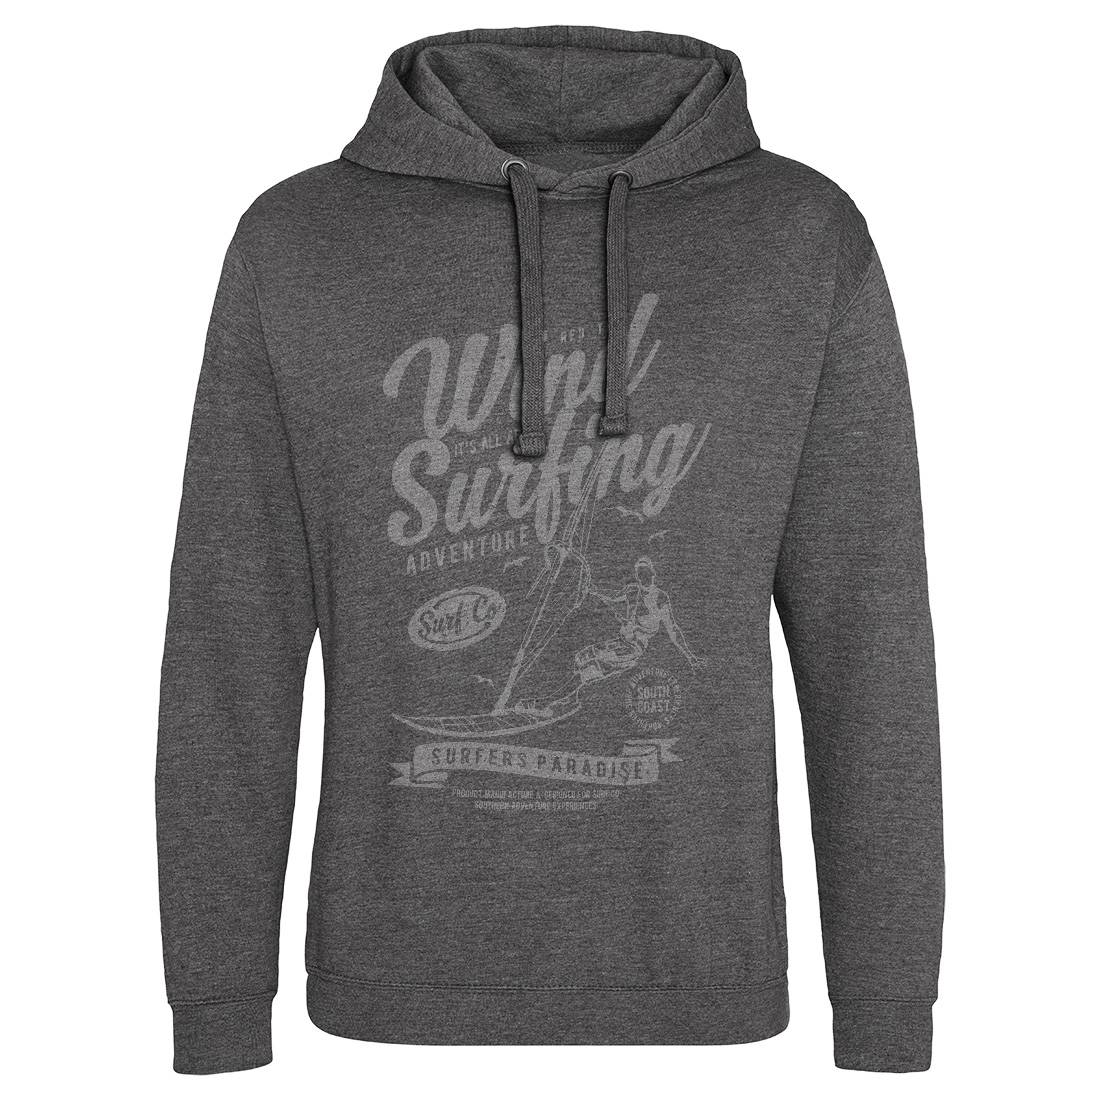 Wind Surfing Mens Hoodie Without Pocket Surf A795